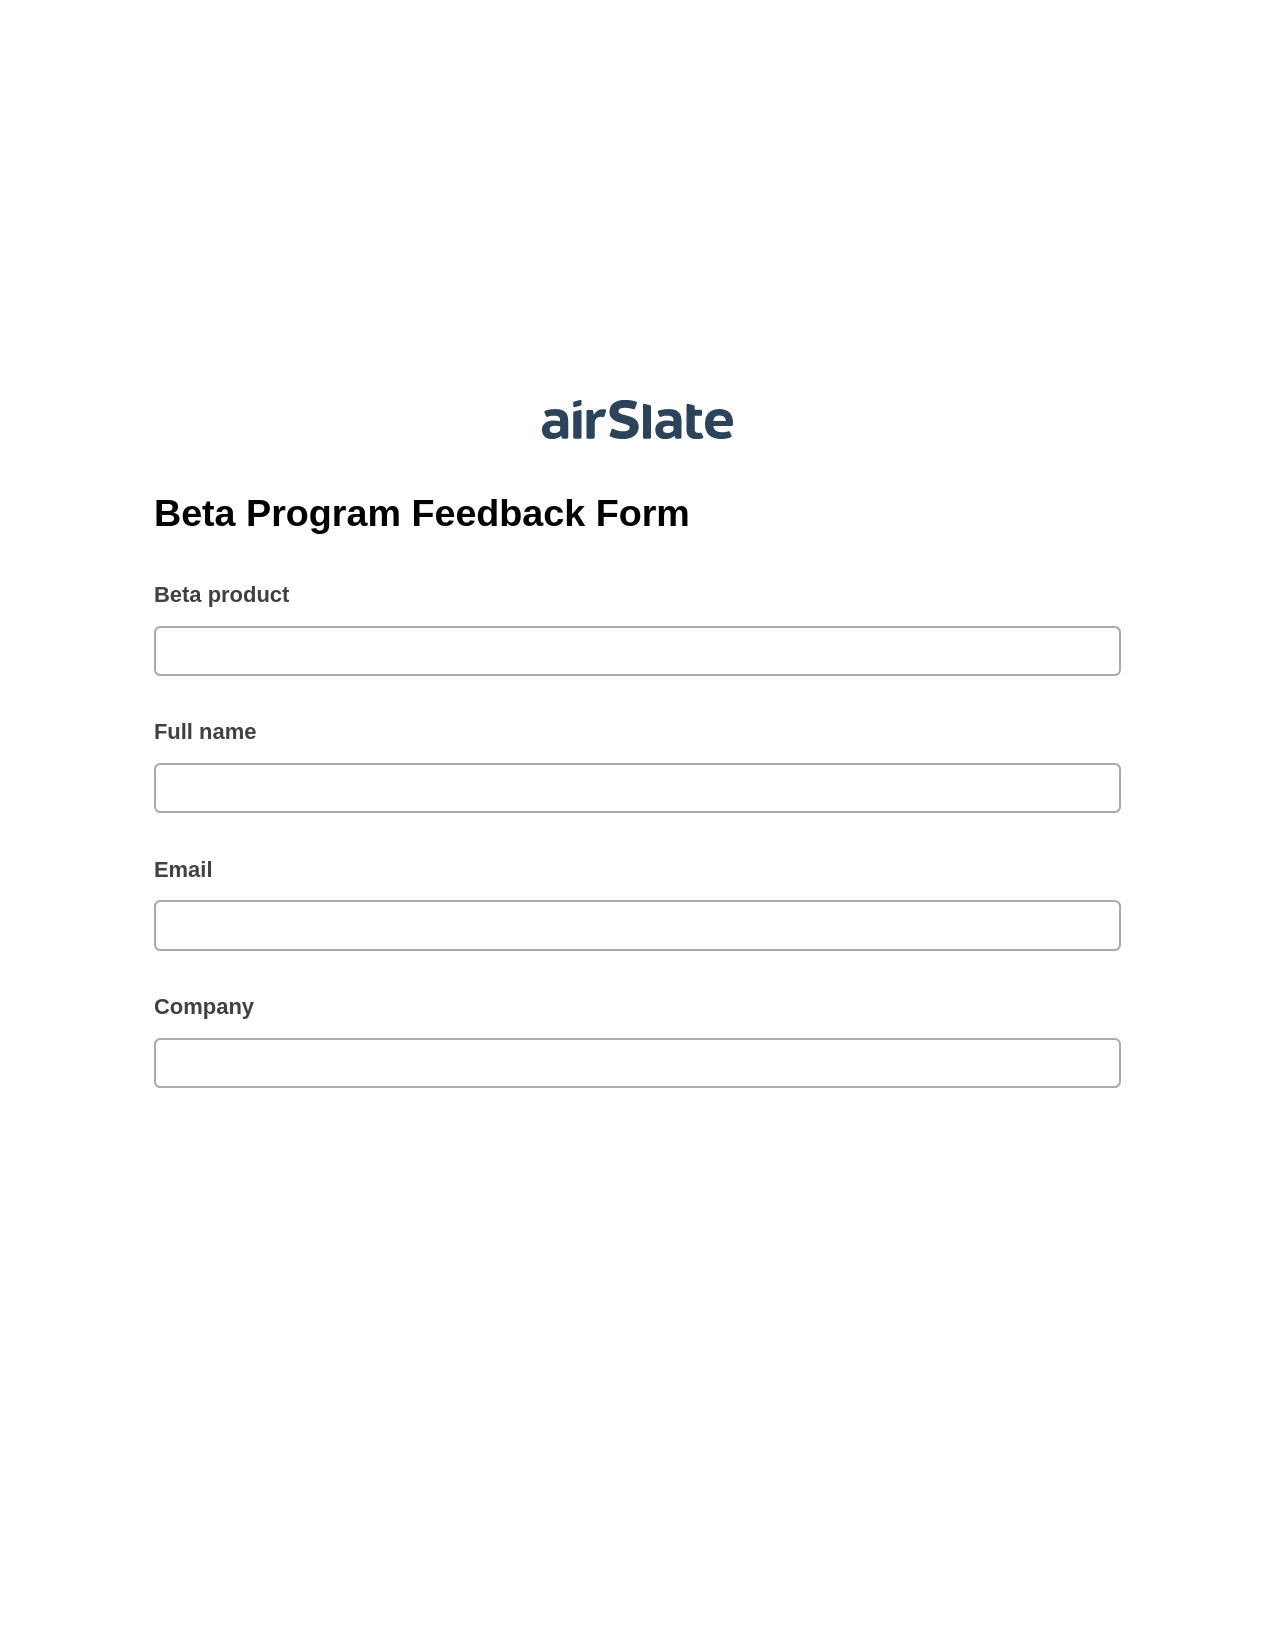 Multirole Beta Program Feedback Form Pre-fill from Excel Spreadsheet Bot, Add Tags to Slate Bot, Export to Smartsheet